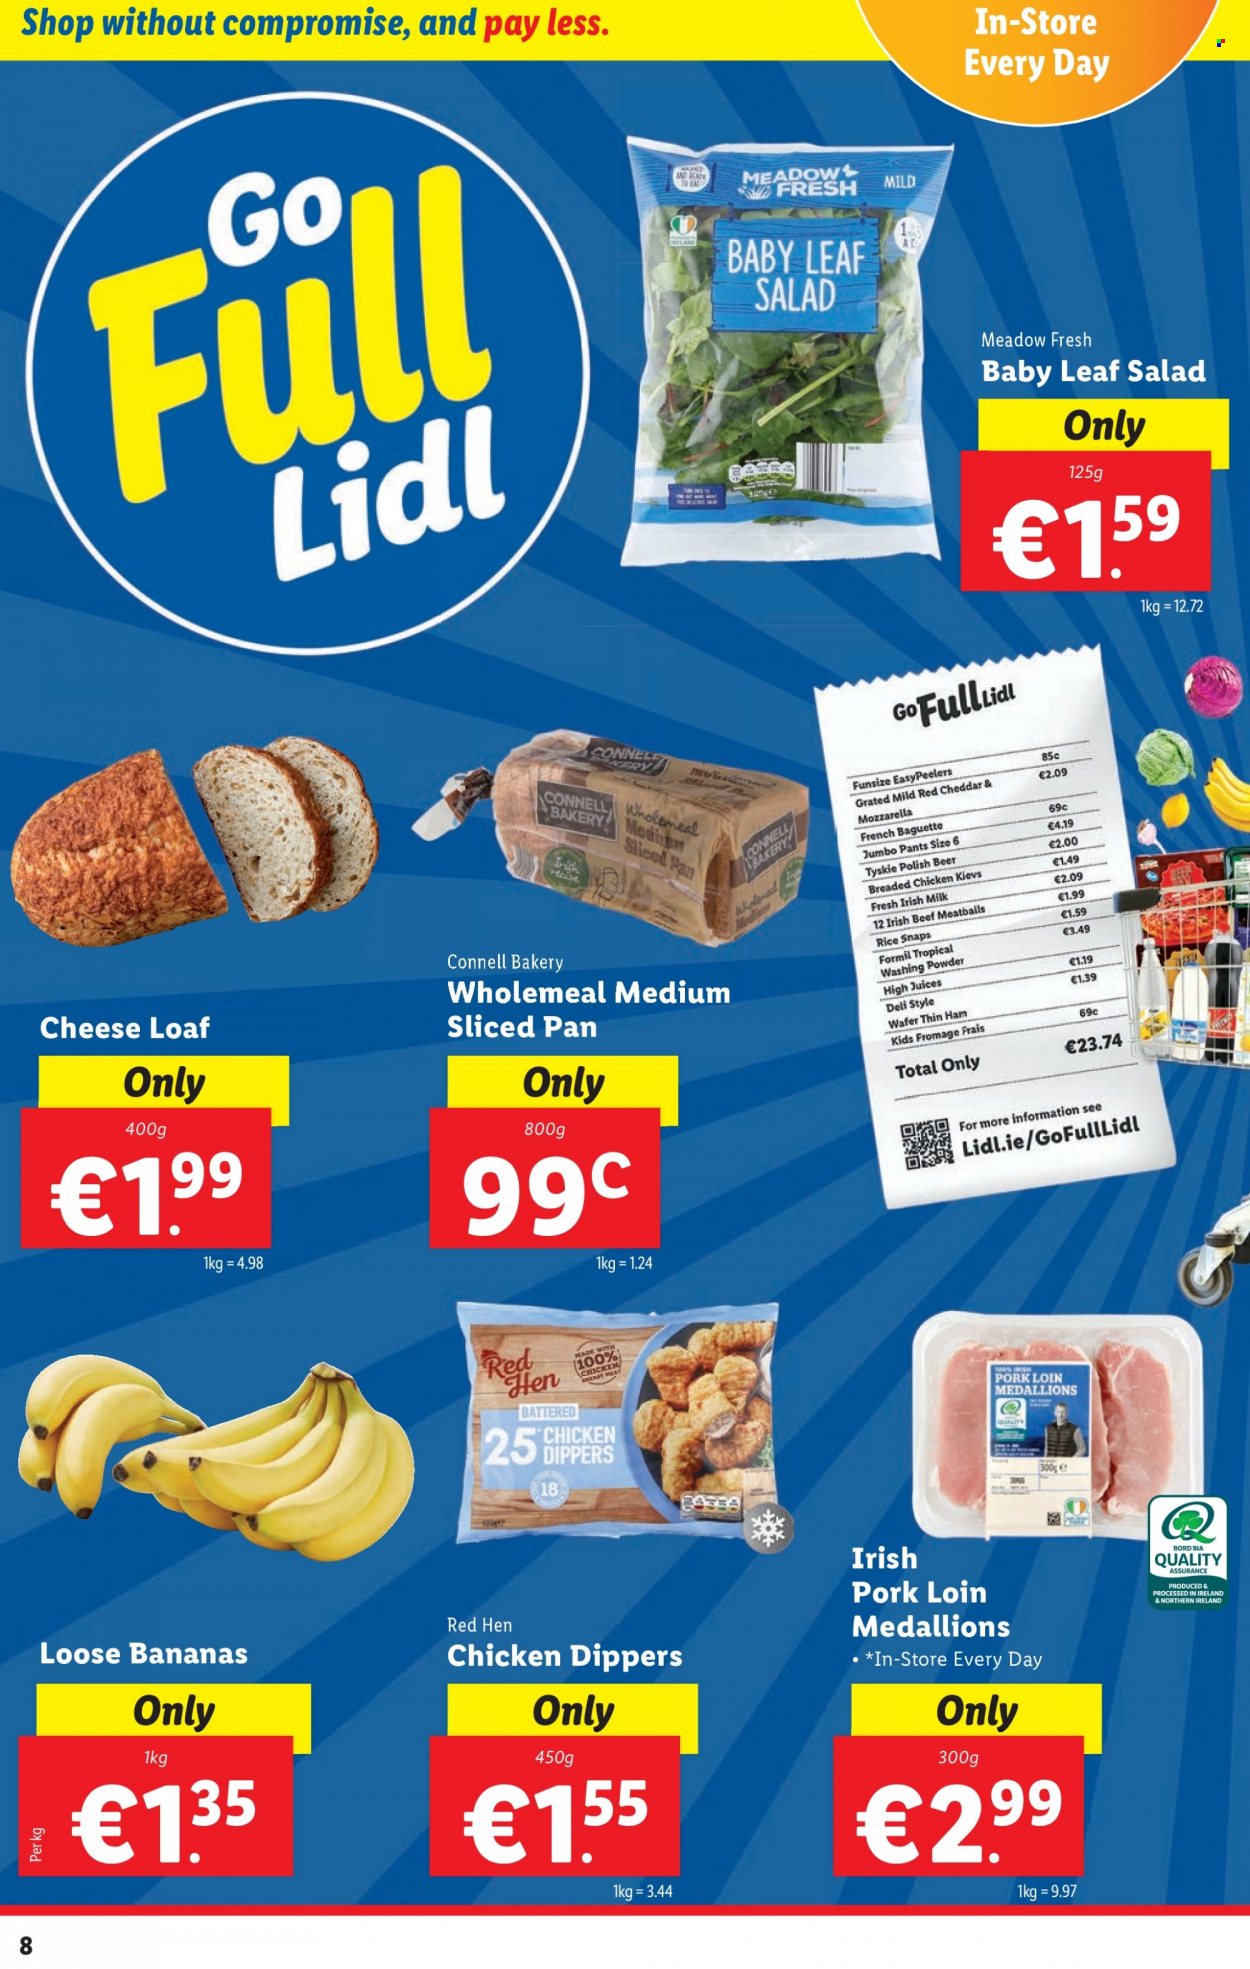 thumbnail - Lidl offer  - 22.09.2022 - 28.09.2022 - Sales products - baguette, bananas, meatballs, fried chicken, ham, cheddar, milk, chicken dippers, Chicken Kiev, wafers, rice, juice, beer, pork loin, pork meat, pants, laundry powder, polish, pan. Page 8.